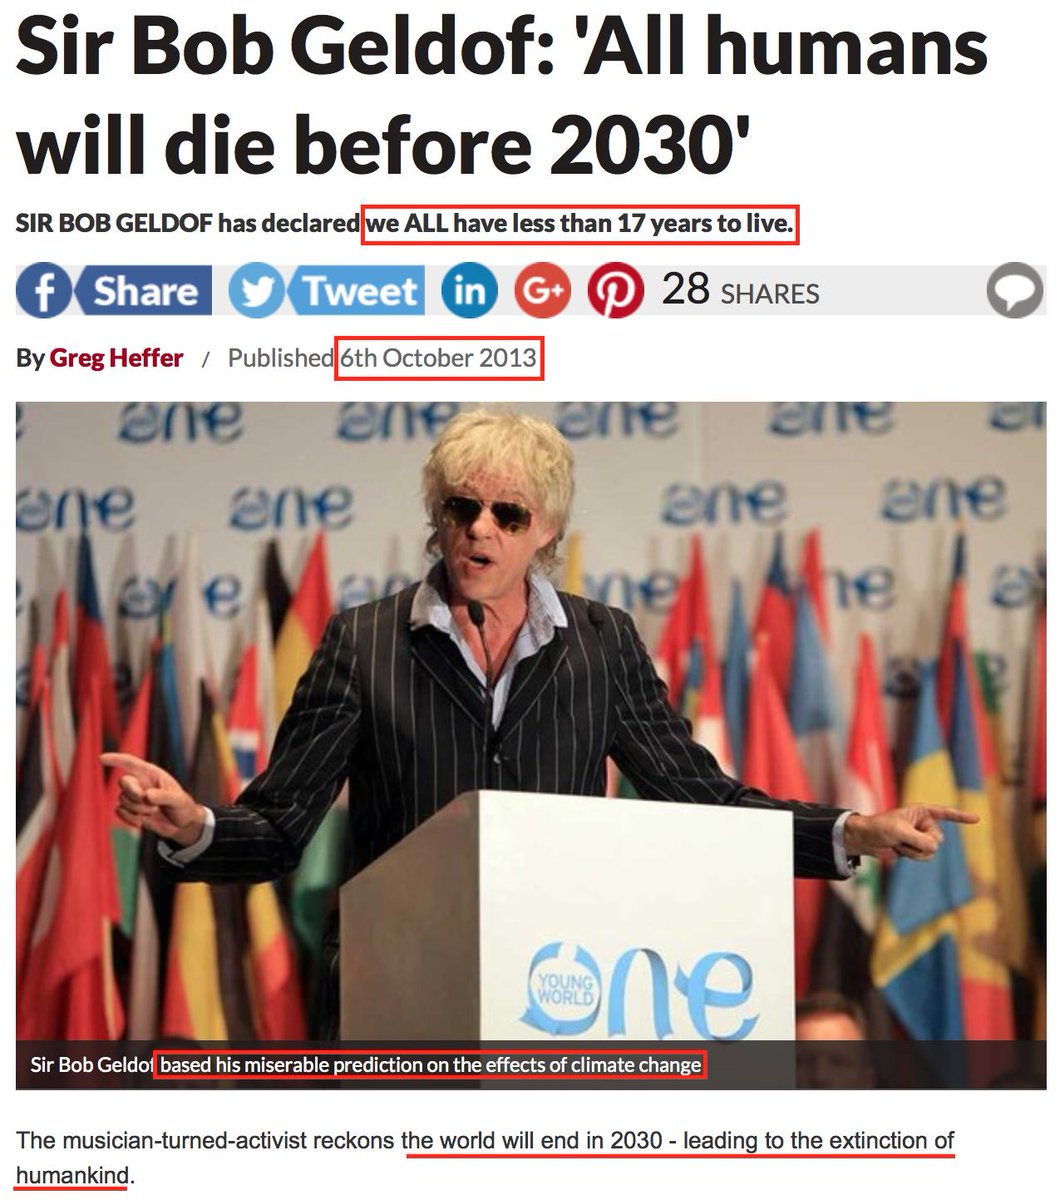 80. 2013 - the media told us we only have 17 years left to live due to climate change. https://www.dailystar.co.uk/news/latest-news/342876/Sir-Bob-Geldof-All-humans-will-die-before-2030